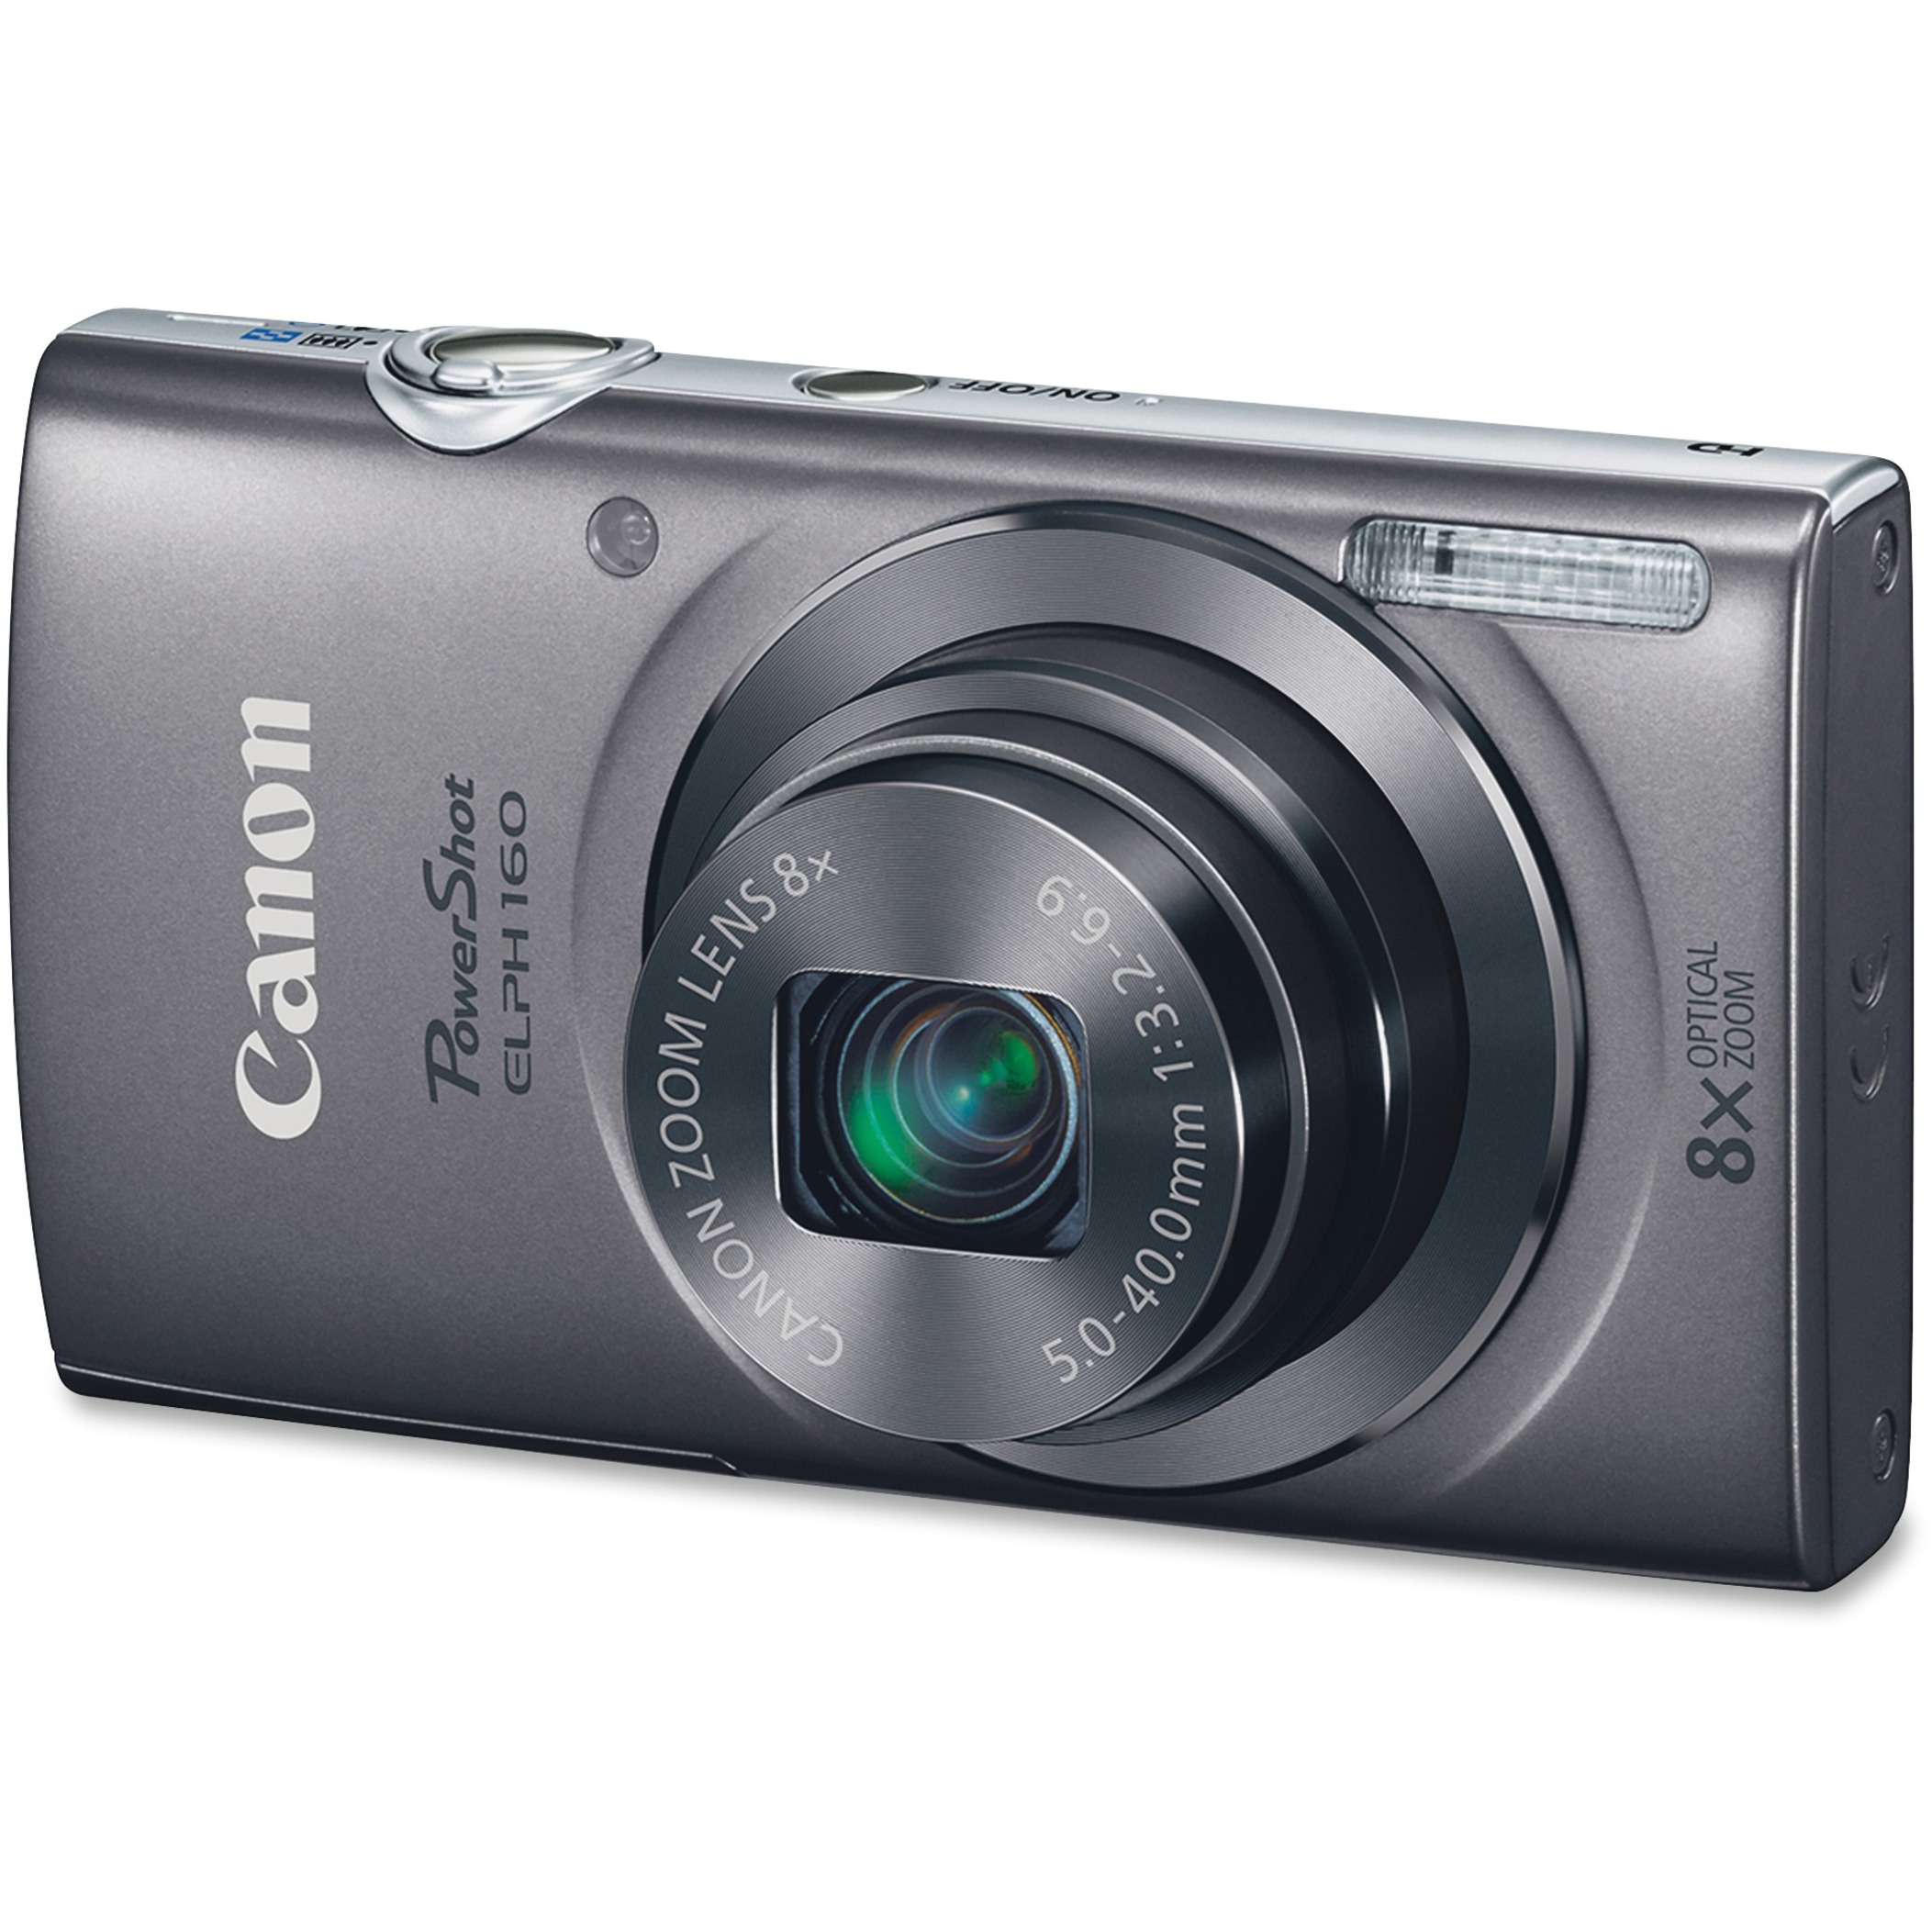 Canon PowerShot ELPH 160 20 Megapixel Compact Camera, Silver - image 1 of 2